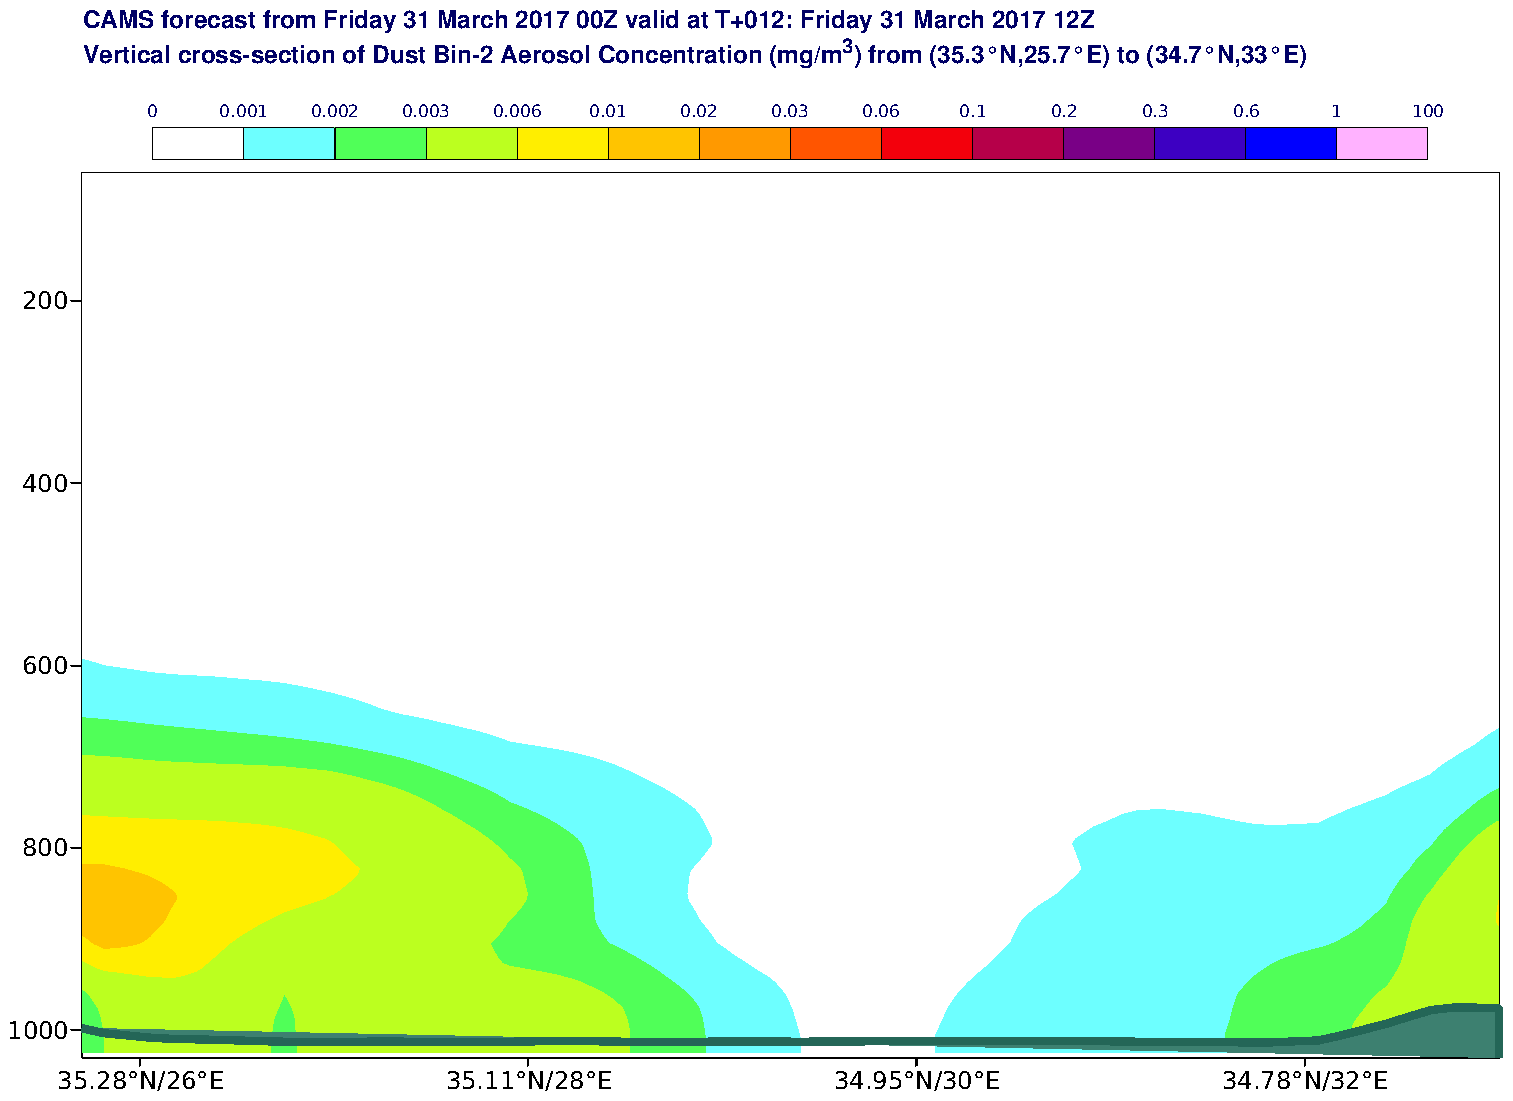 Vertical cross-section of Dust Bin-2 Aerosol Concentration (mg/m3) valid at T12 - 2017-03-31 12:00